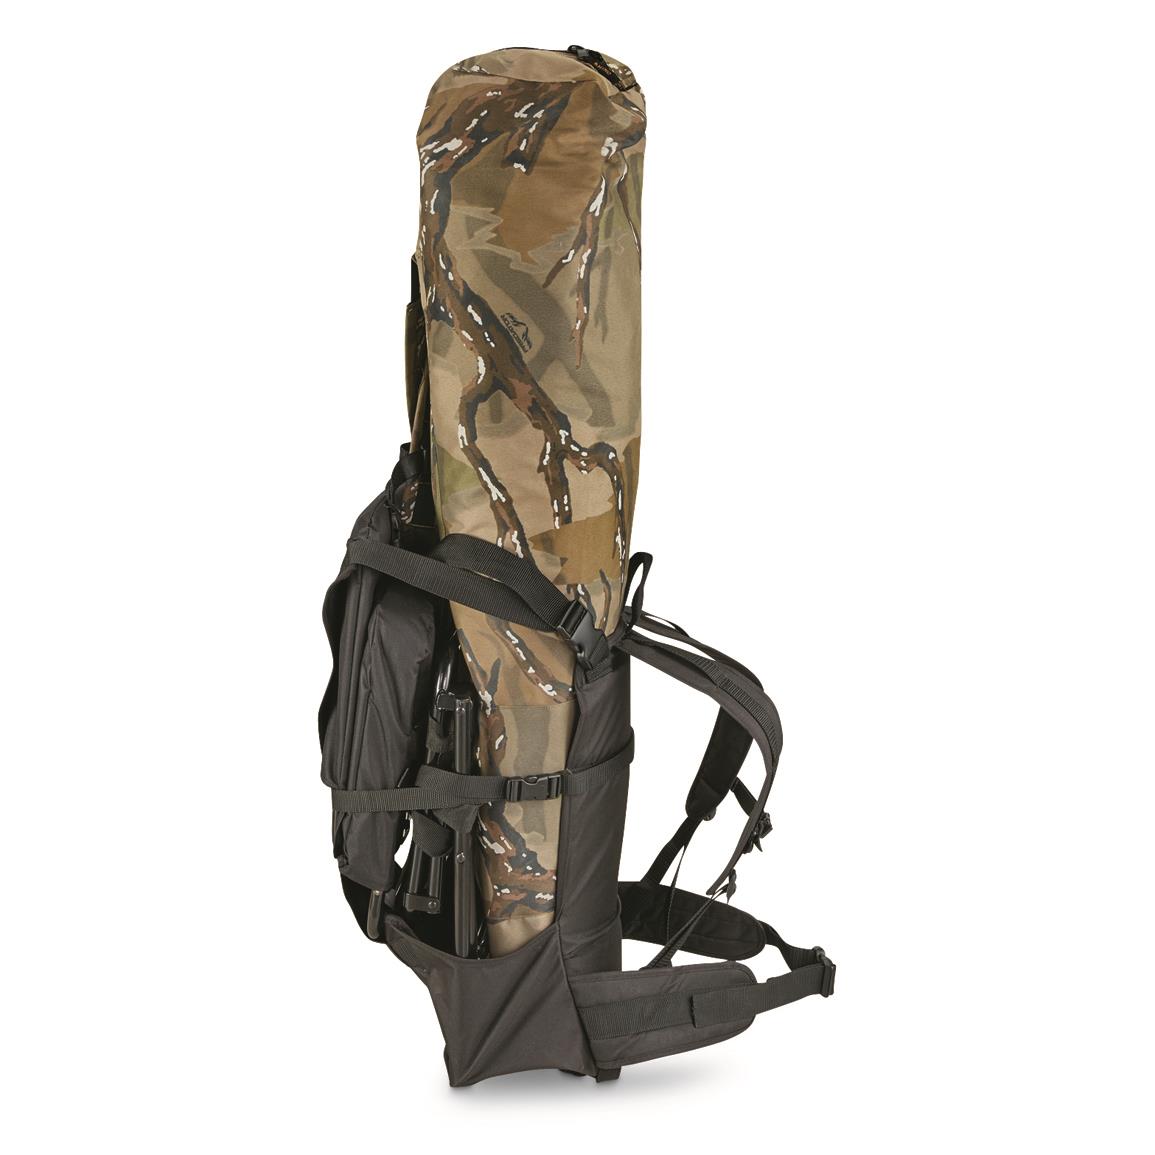 Guide Gear Ground Blind And Hunting Chair Carrying Pack 704485 Blind Accessories At Sportsman S Guide